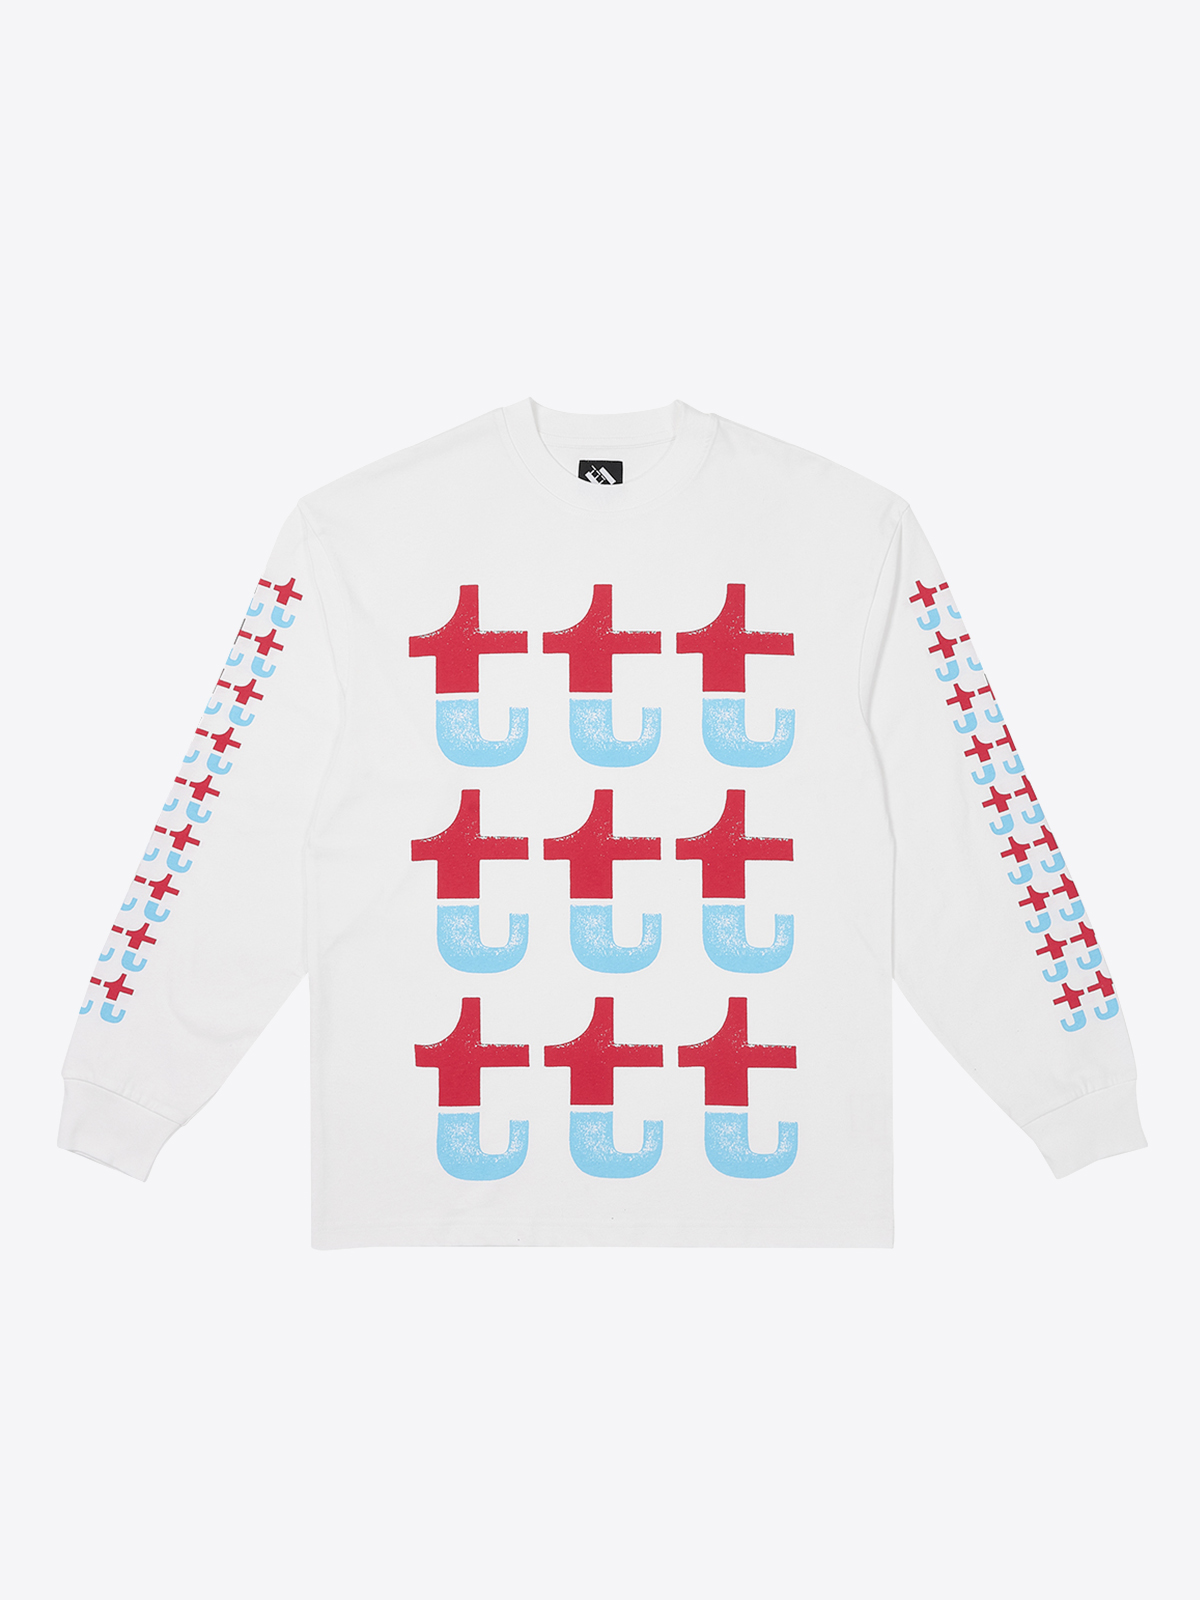 the trilogy tapes ttt  | RED AND BLUE SPLIT LONGSLEEVE